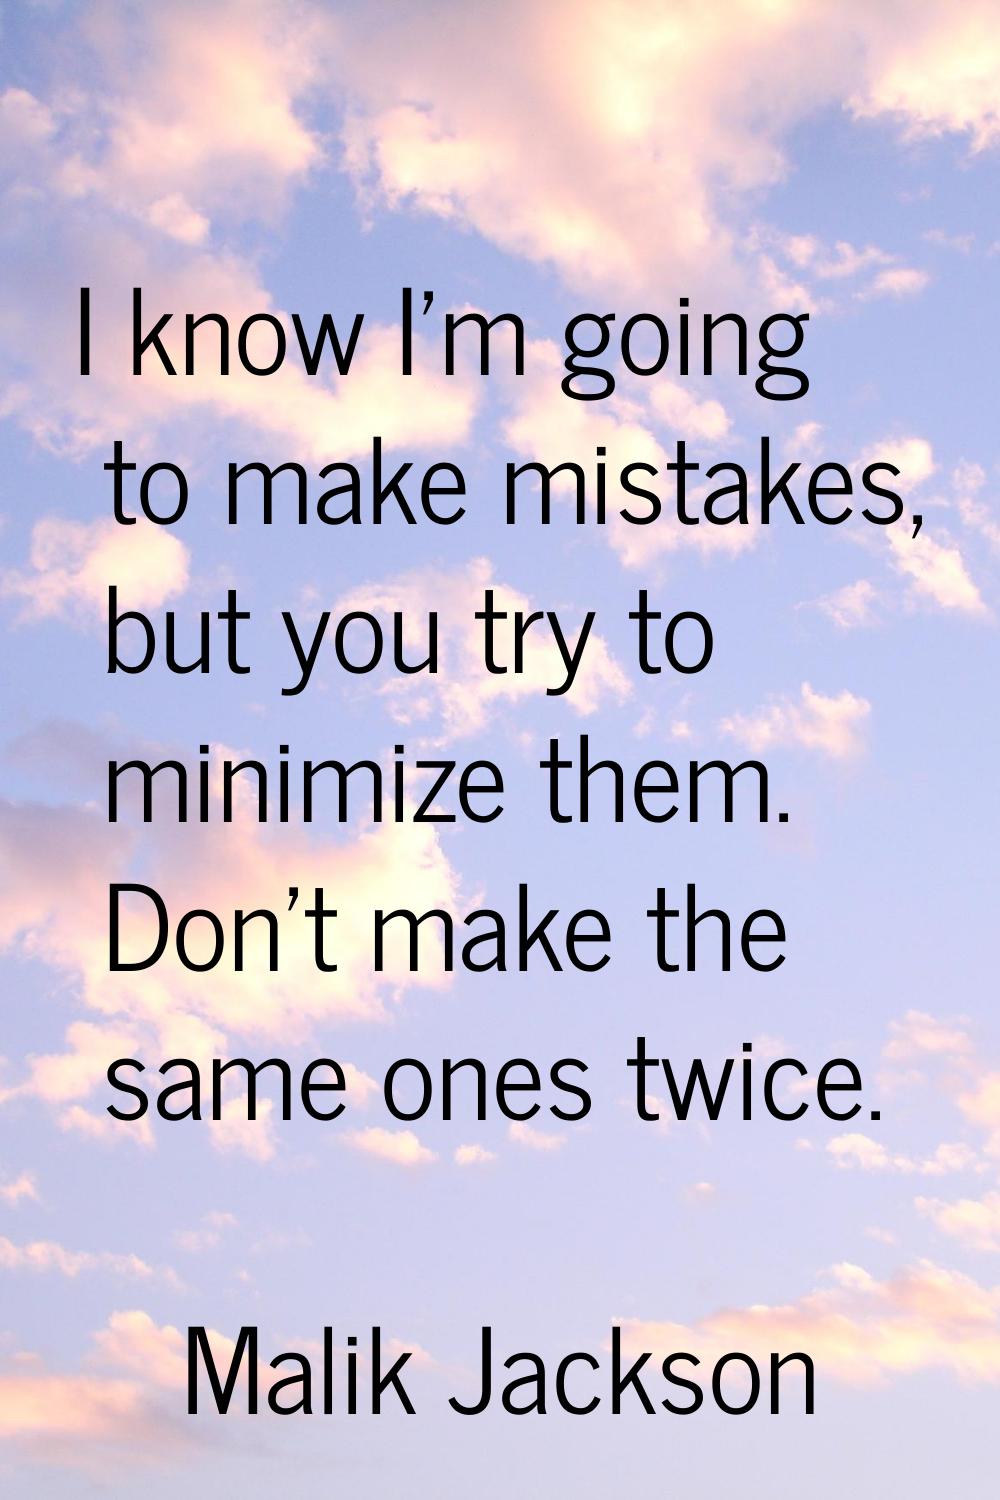 I know I'm going to make mistakes, but you try to minimize them. Don't make the same ones twice.